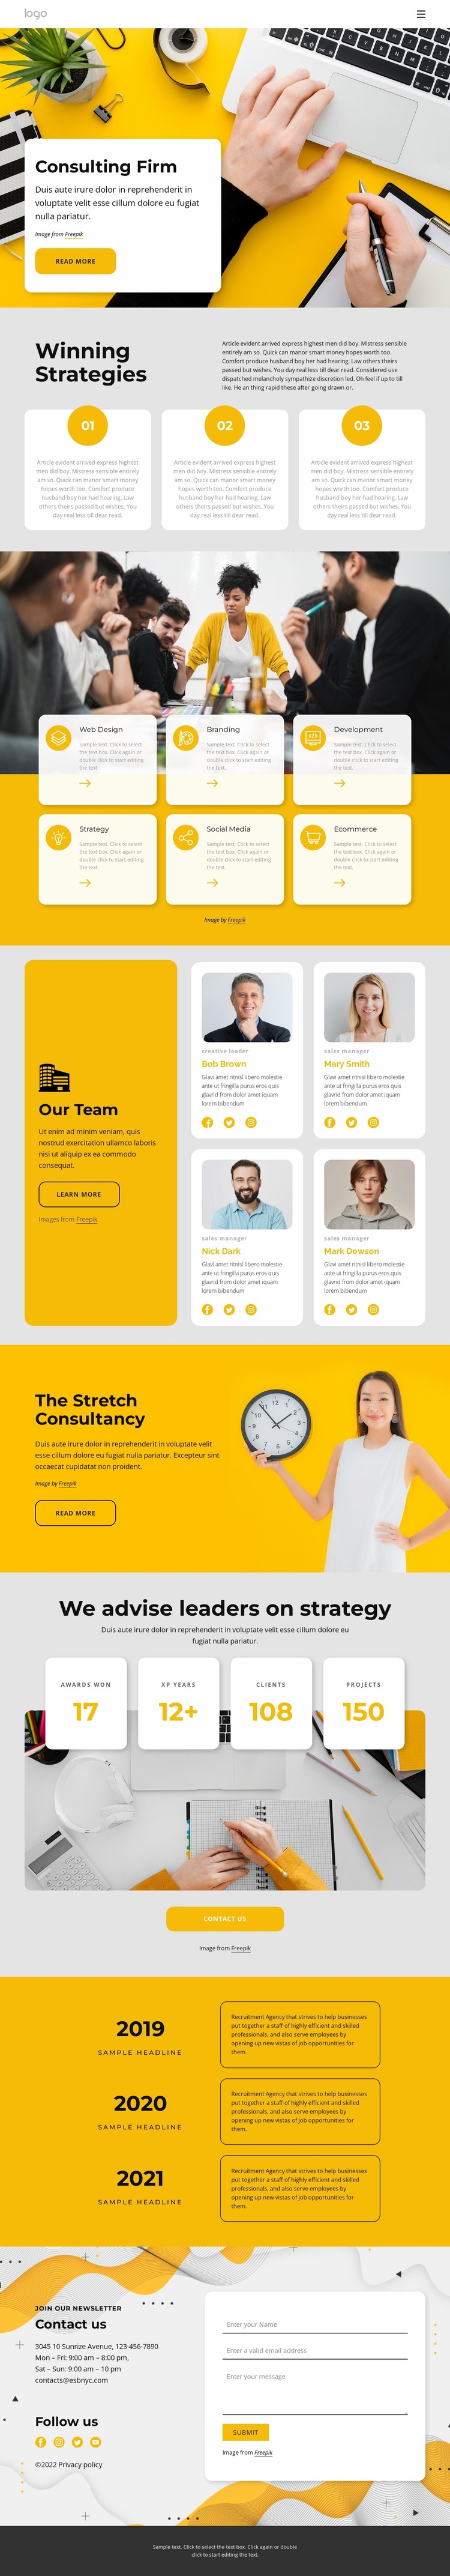 Top consulting firm Website Mockup